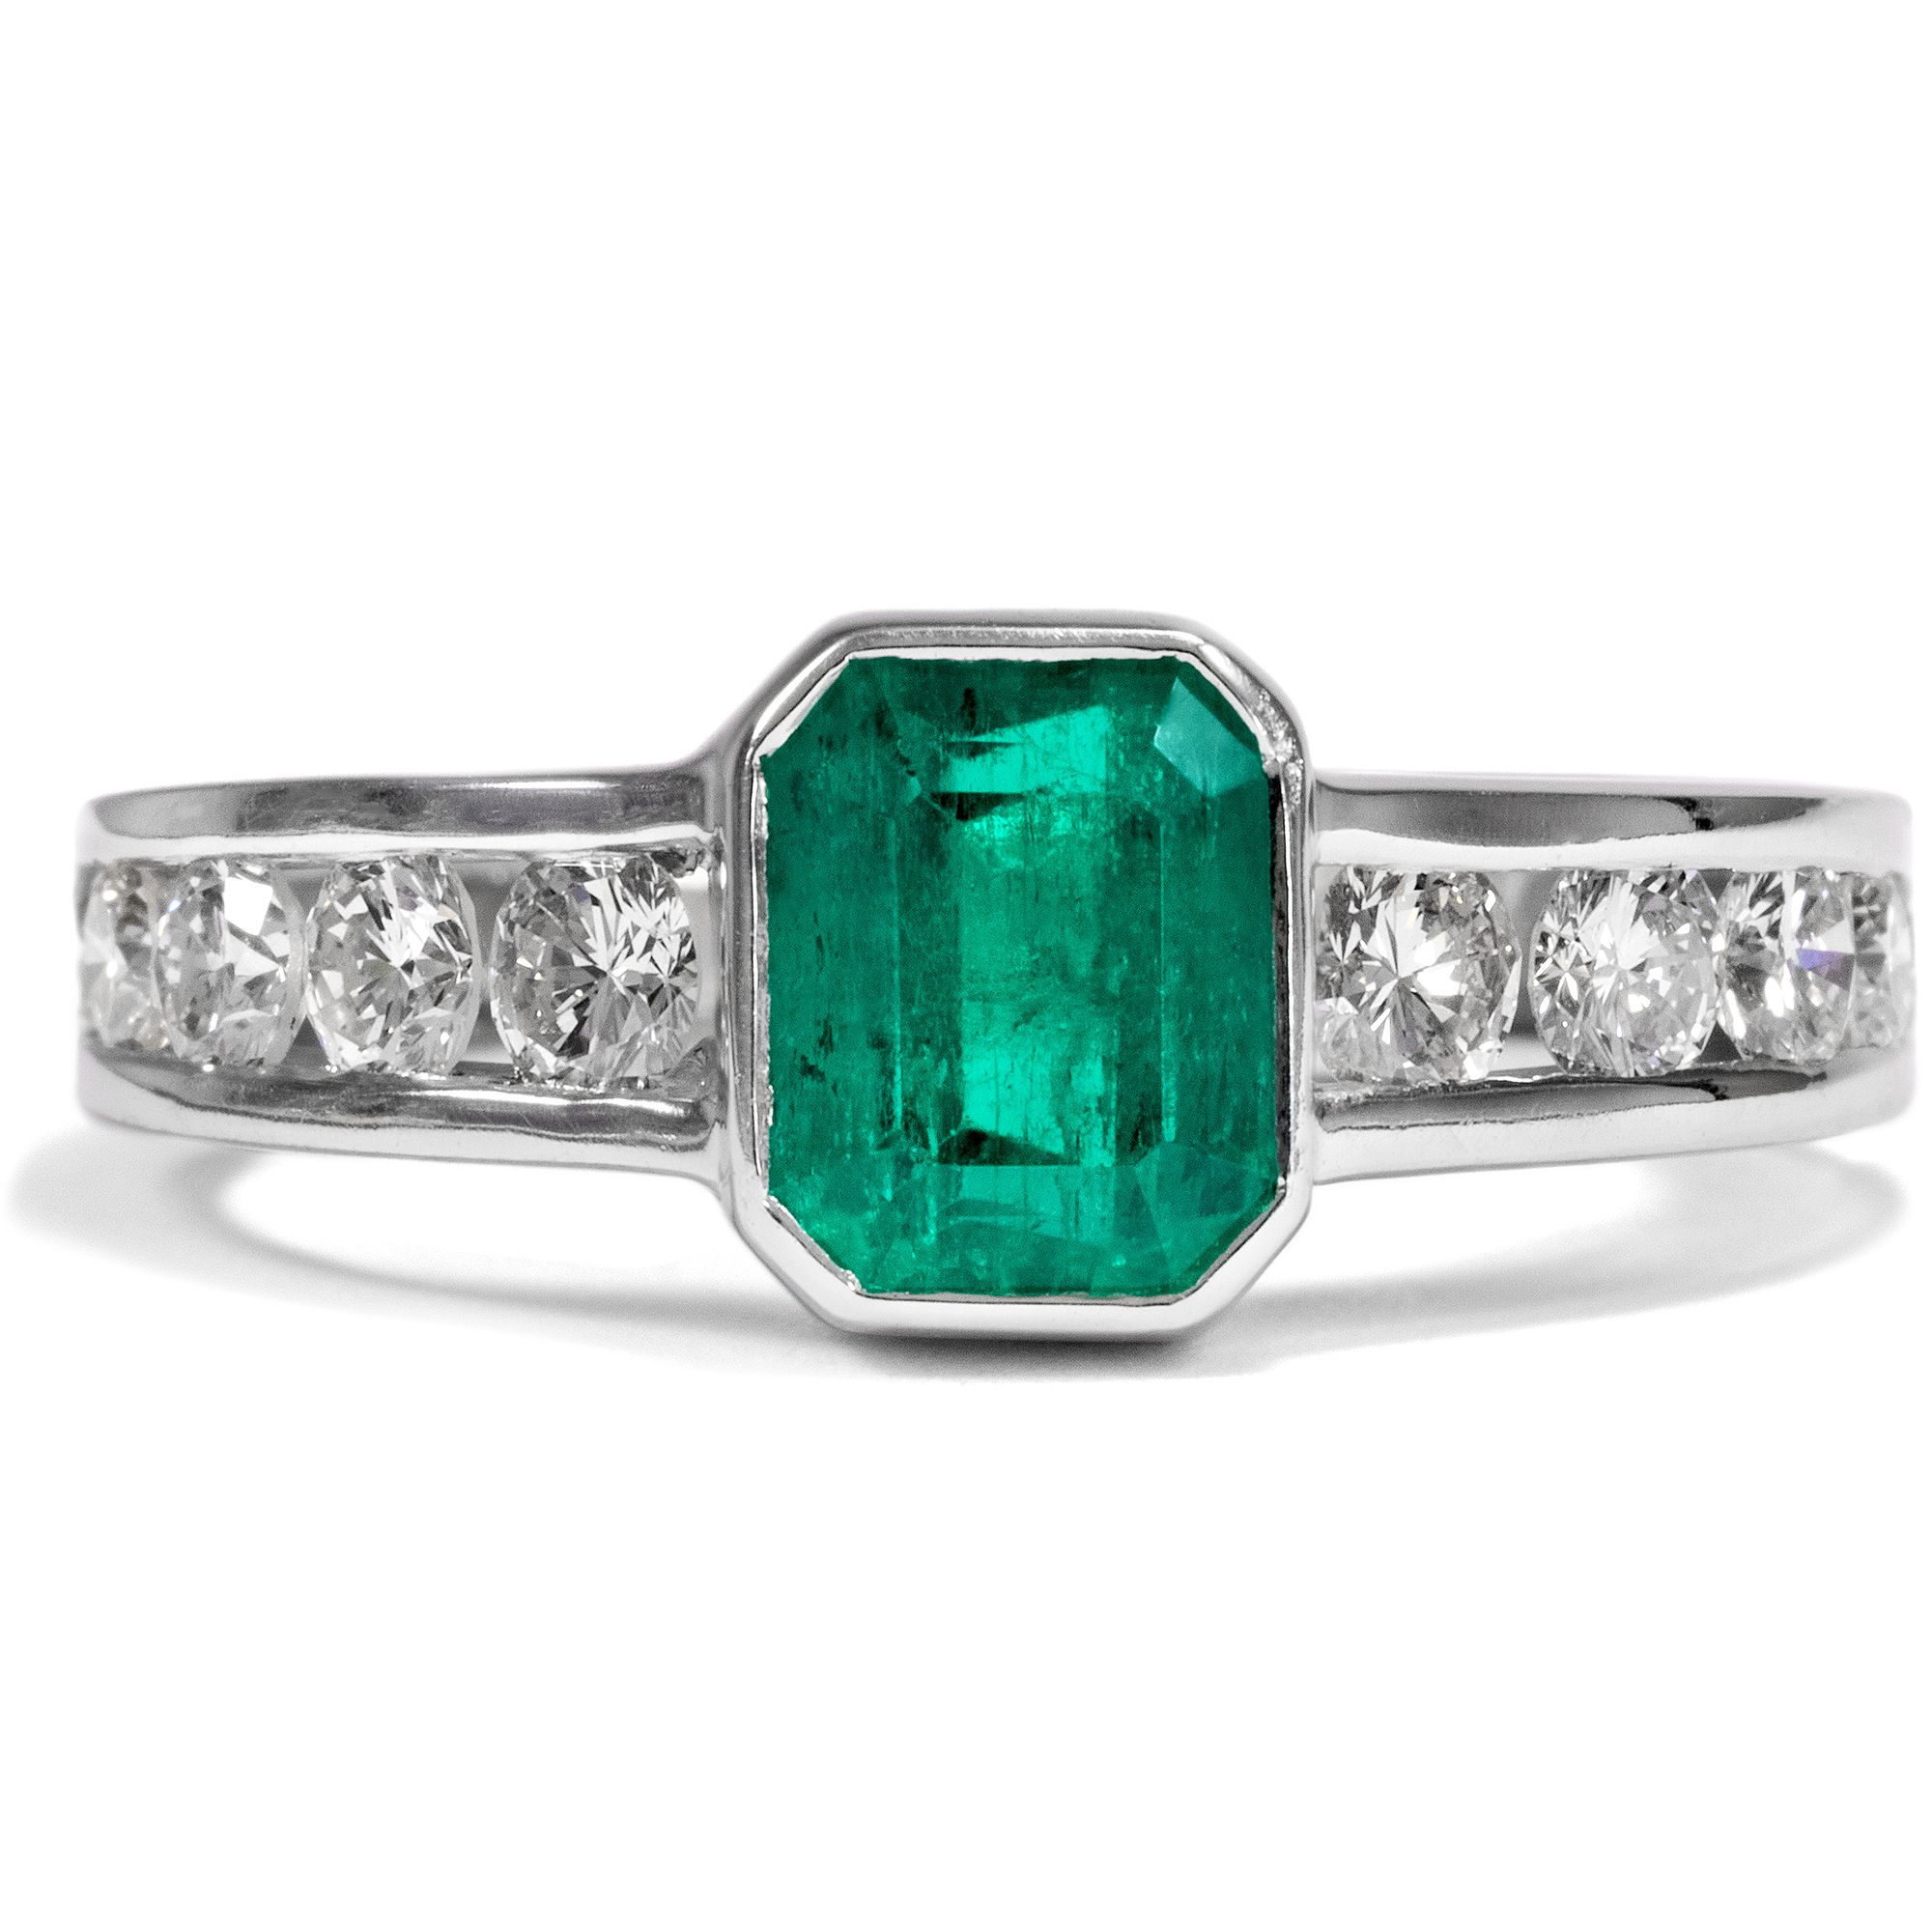 Expressive Vintage Ring With Emerald & Diamonds, ca. 1990